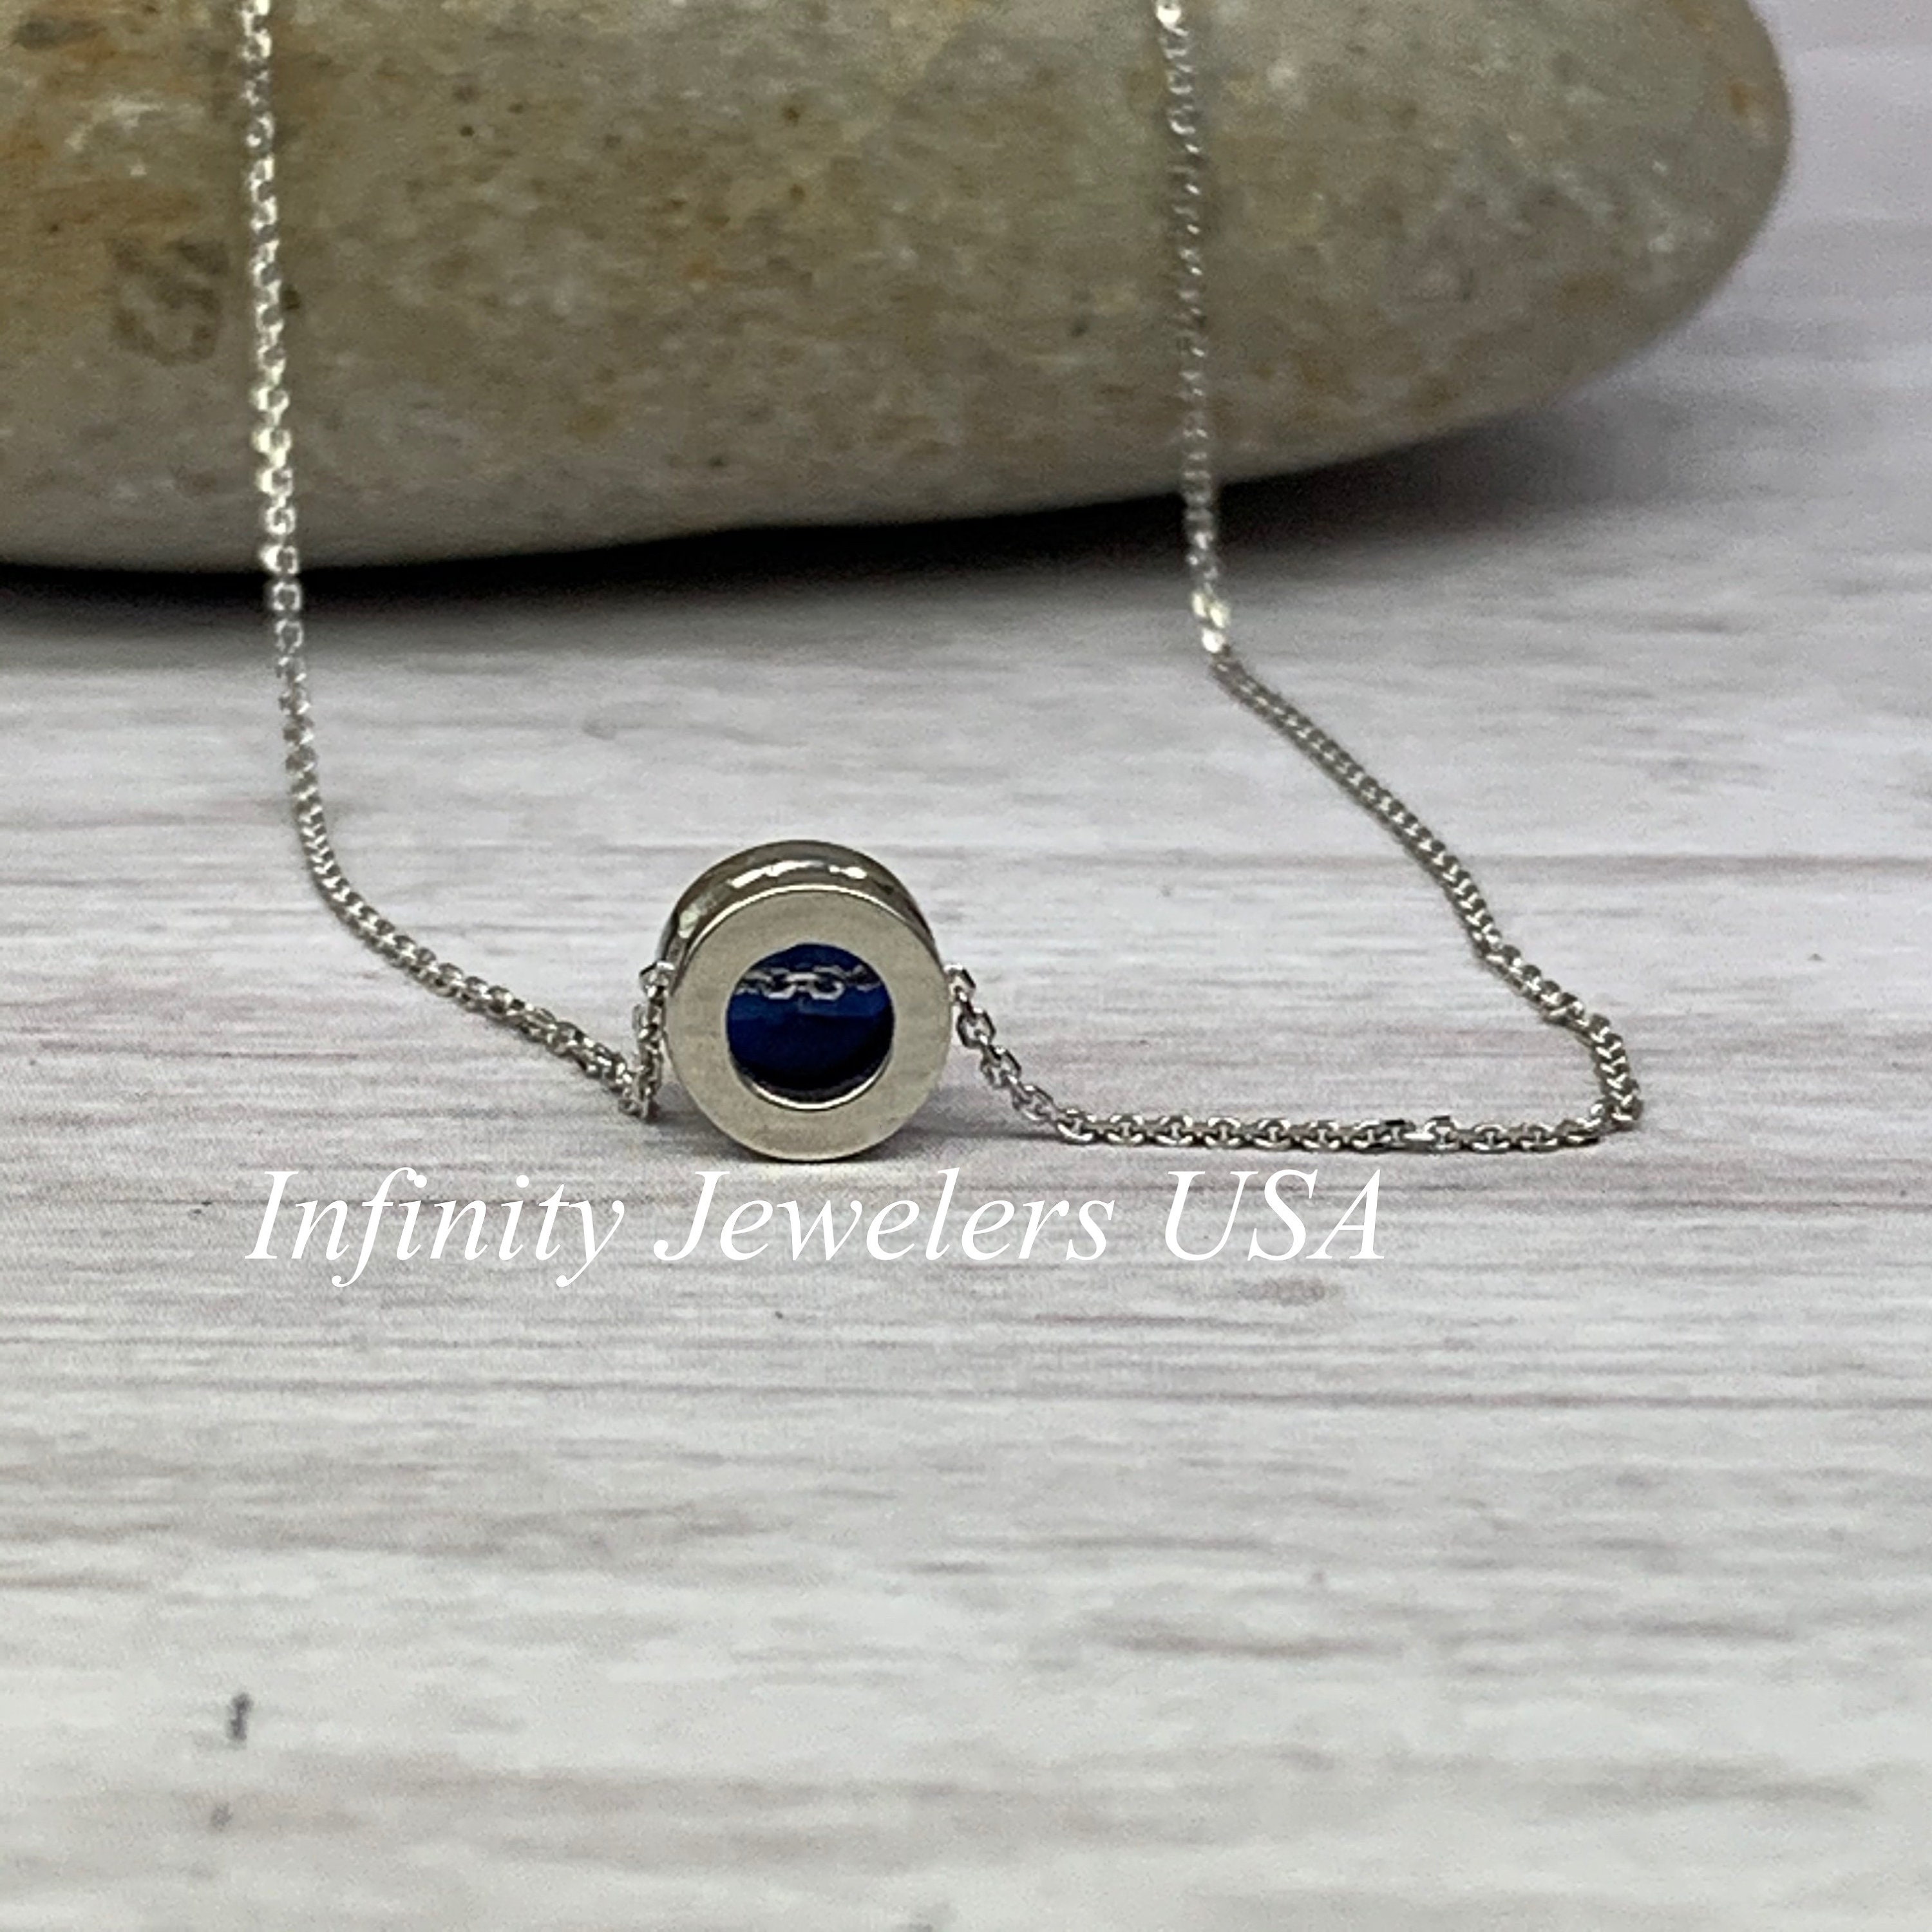 Floating Sapphire Necklace – STONE AND STRAND